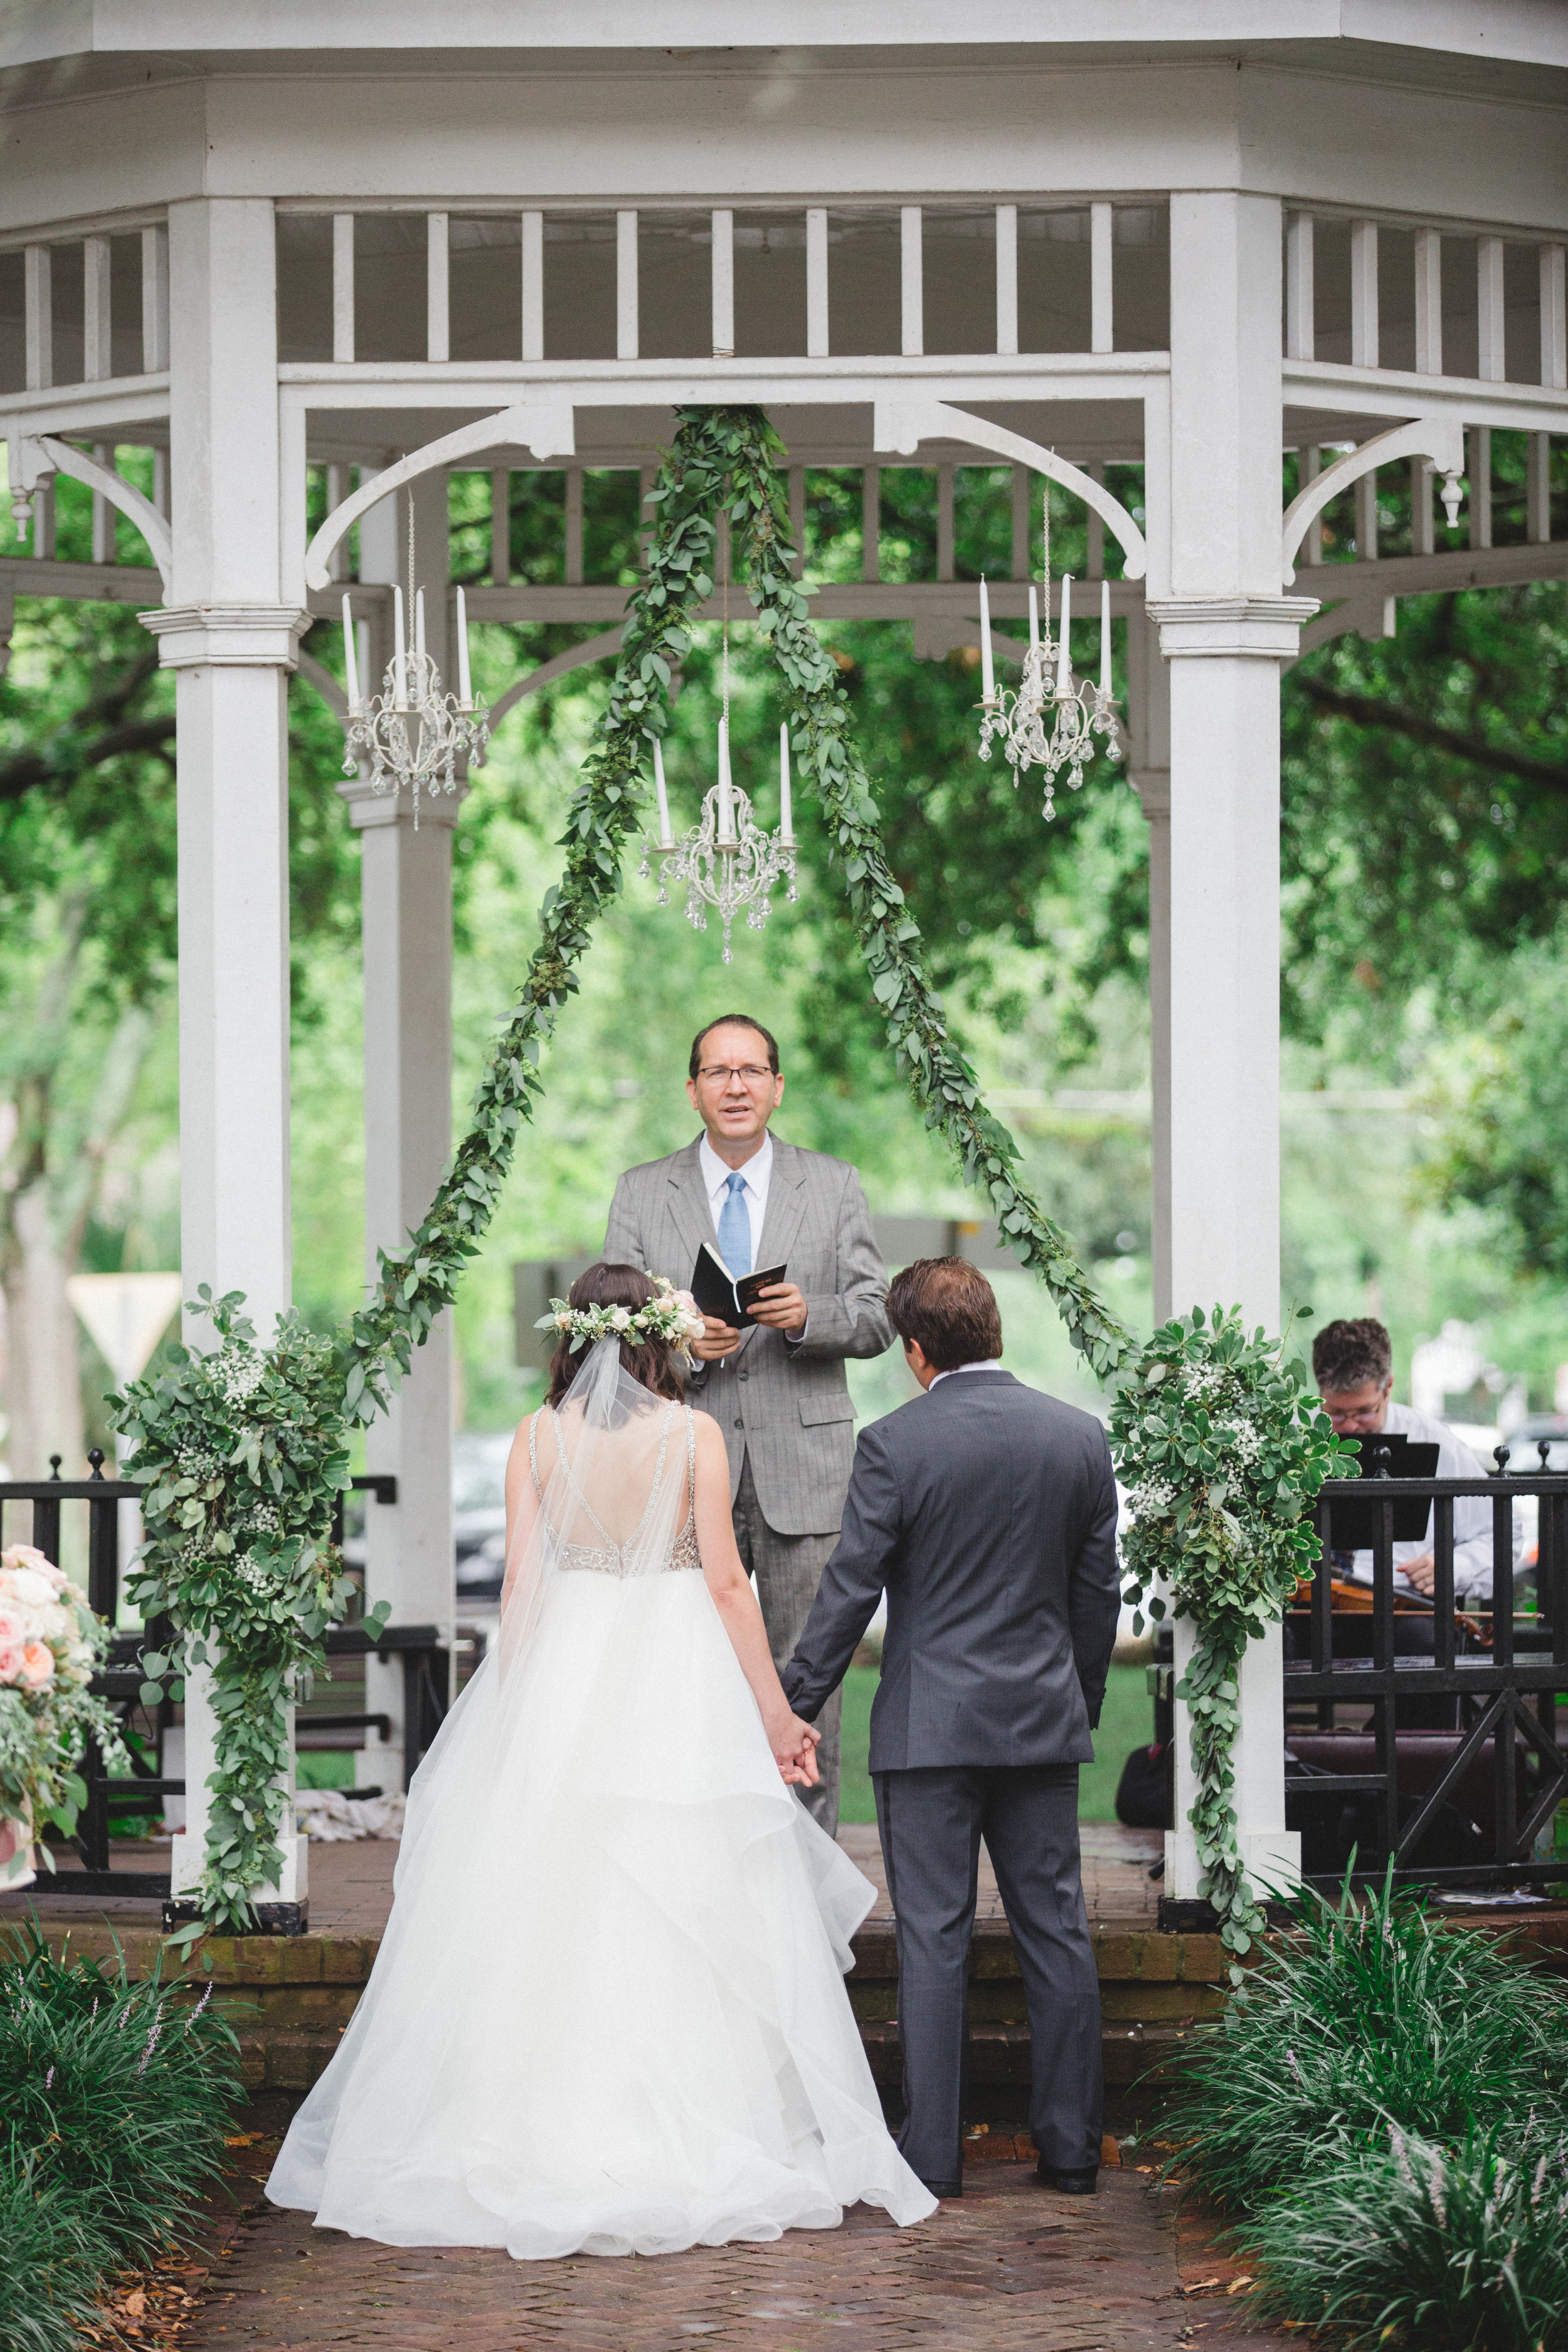 daniela-and-pedro-wedding-izzy-hudgins-photography-a-to-zinnias-whitfield-square-charles-h-morris-center-wedding-ivoyy-and-beau-bridal-boutique-dorie-hayley-paige-savannah-wedding-planner-savannah-bridal-boutique-savannah-weddings-26.jpg